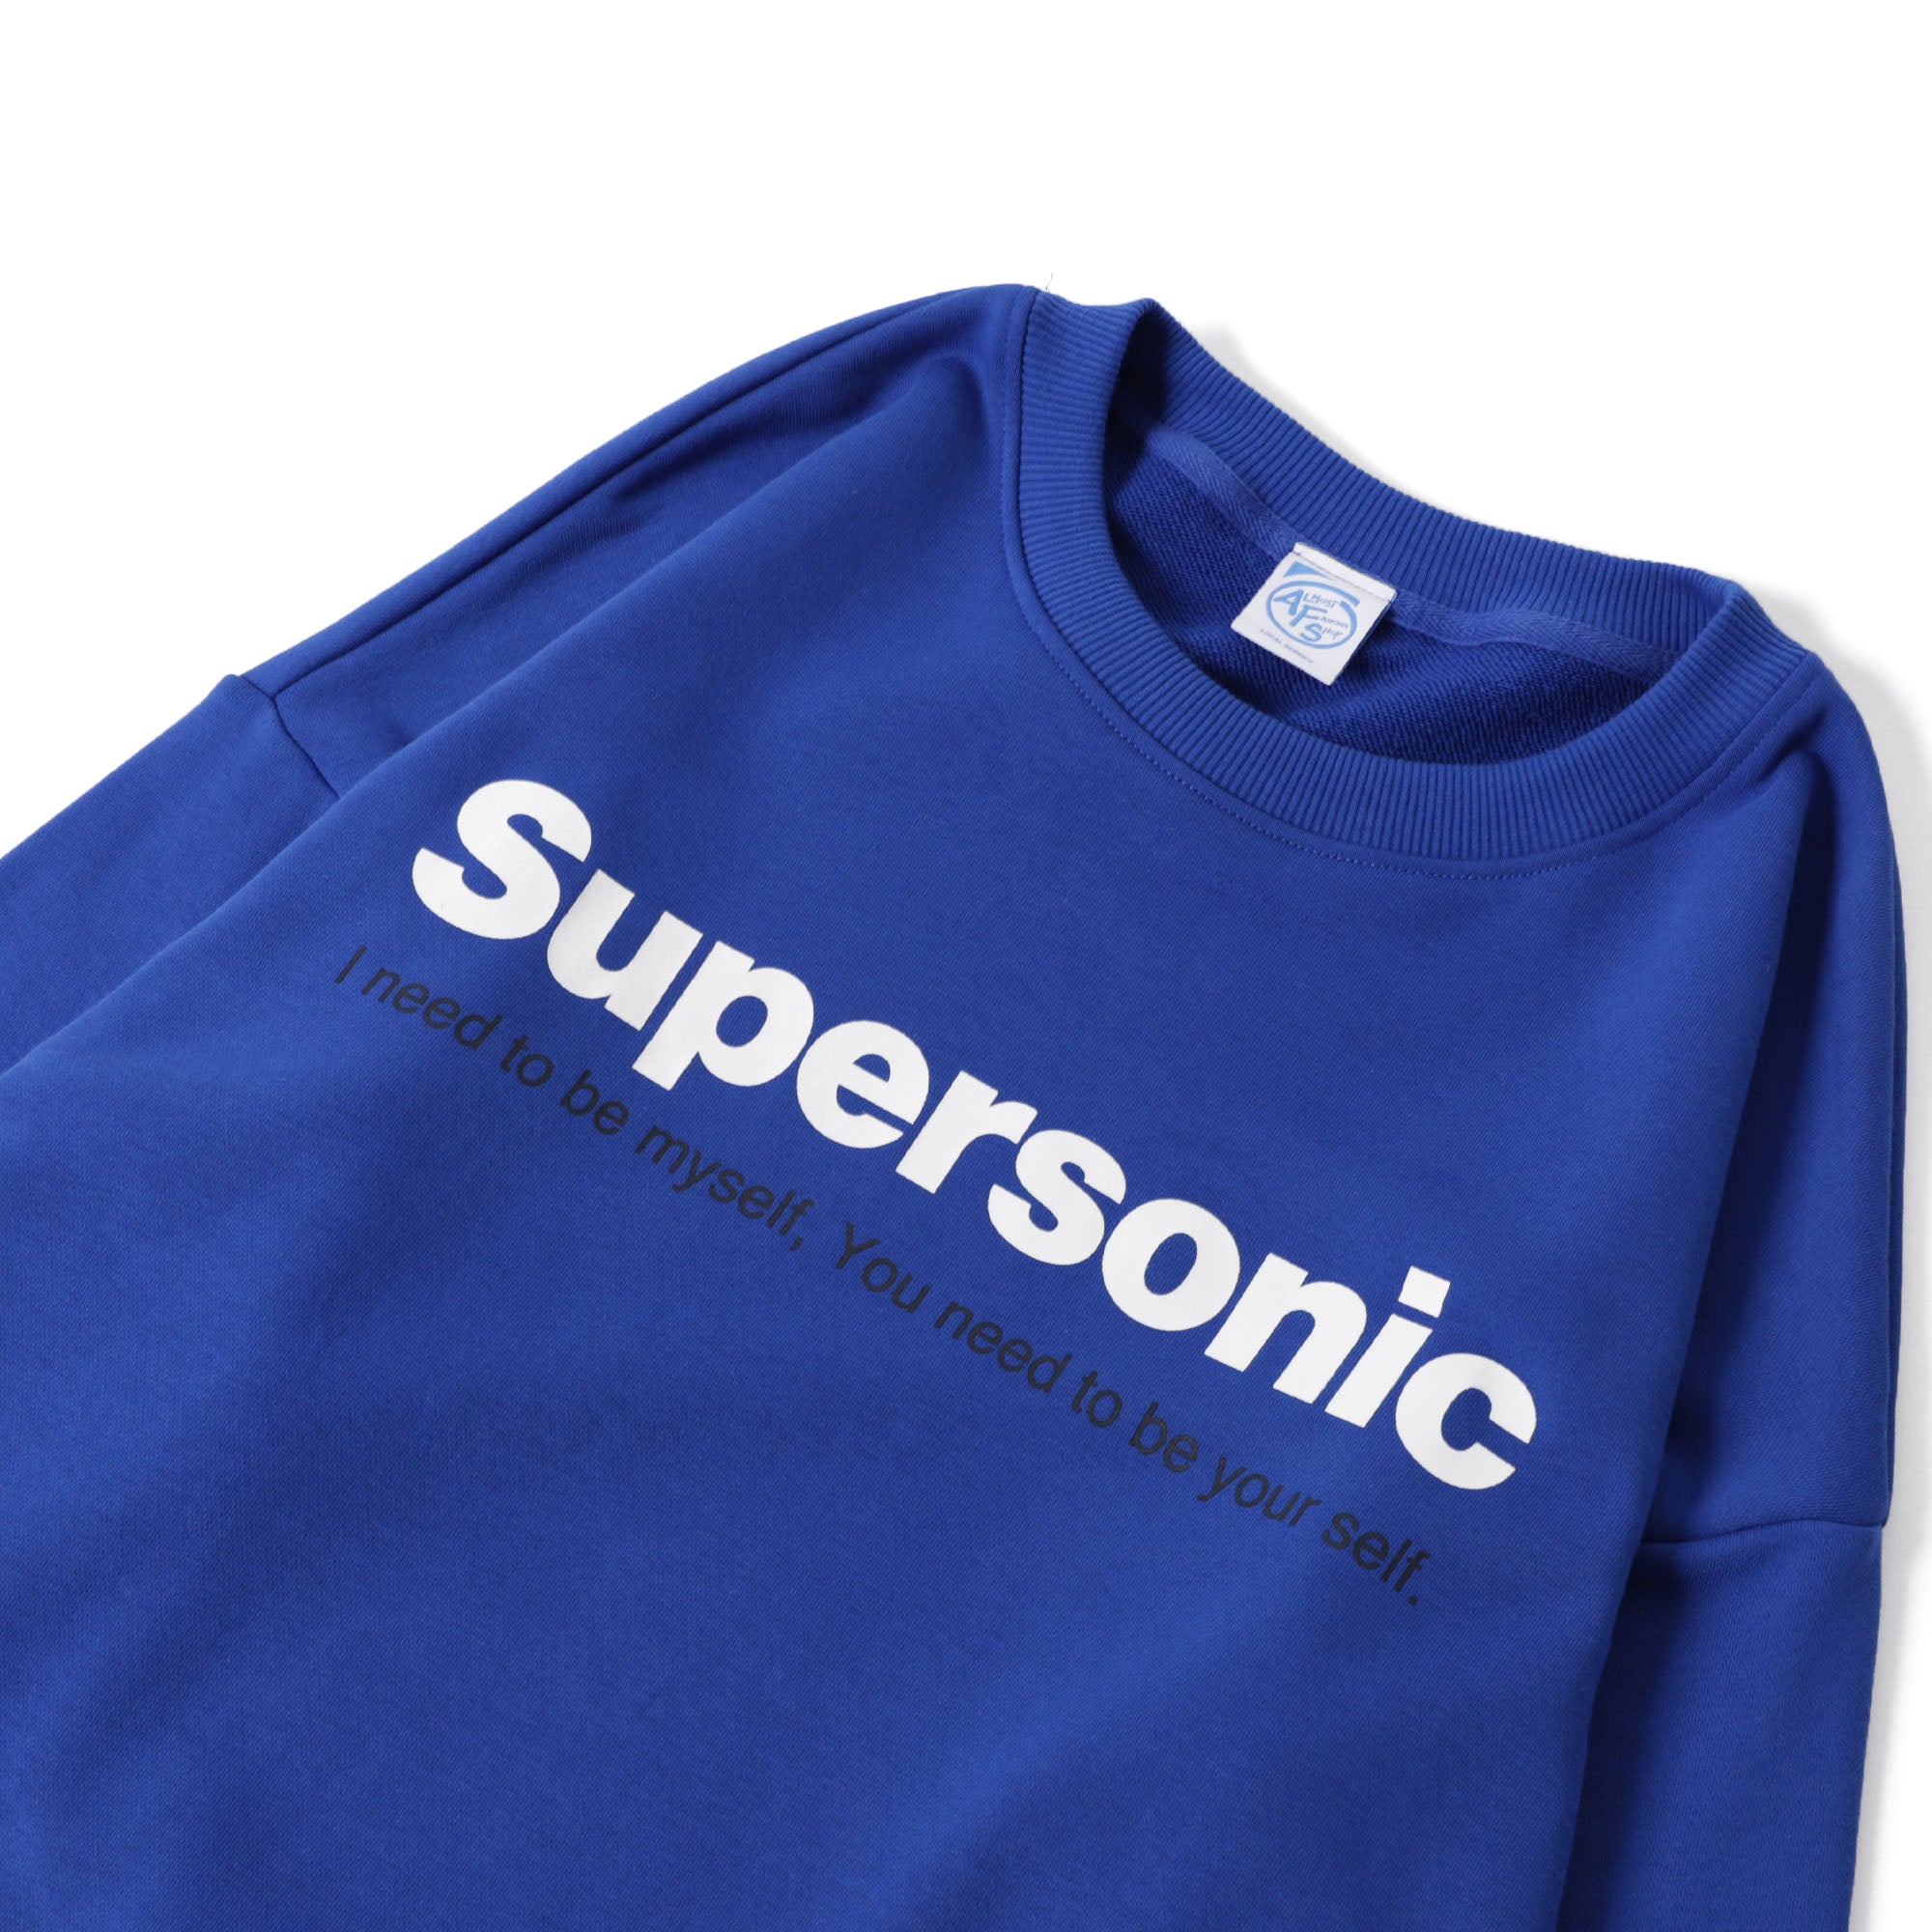 AFS [Supersonic] C/N SWEAT